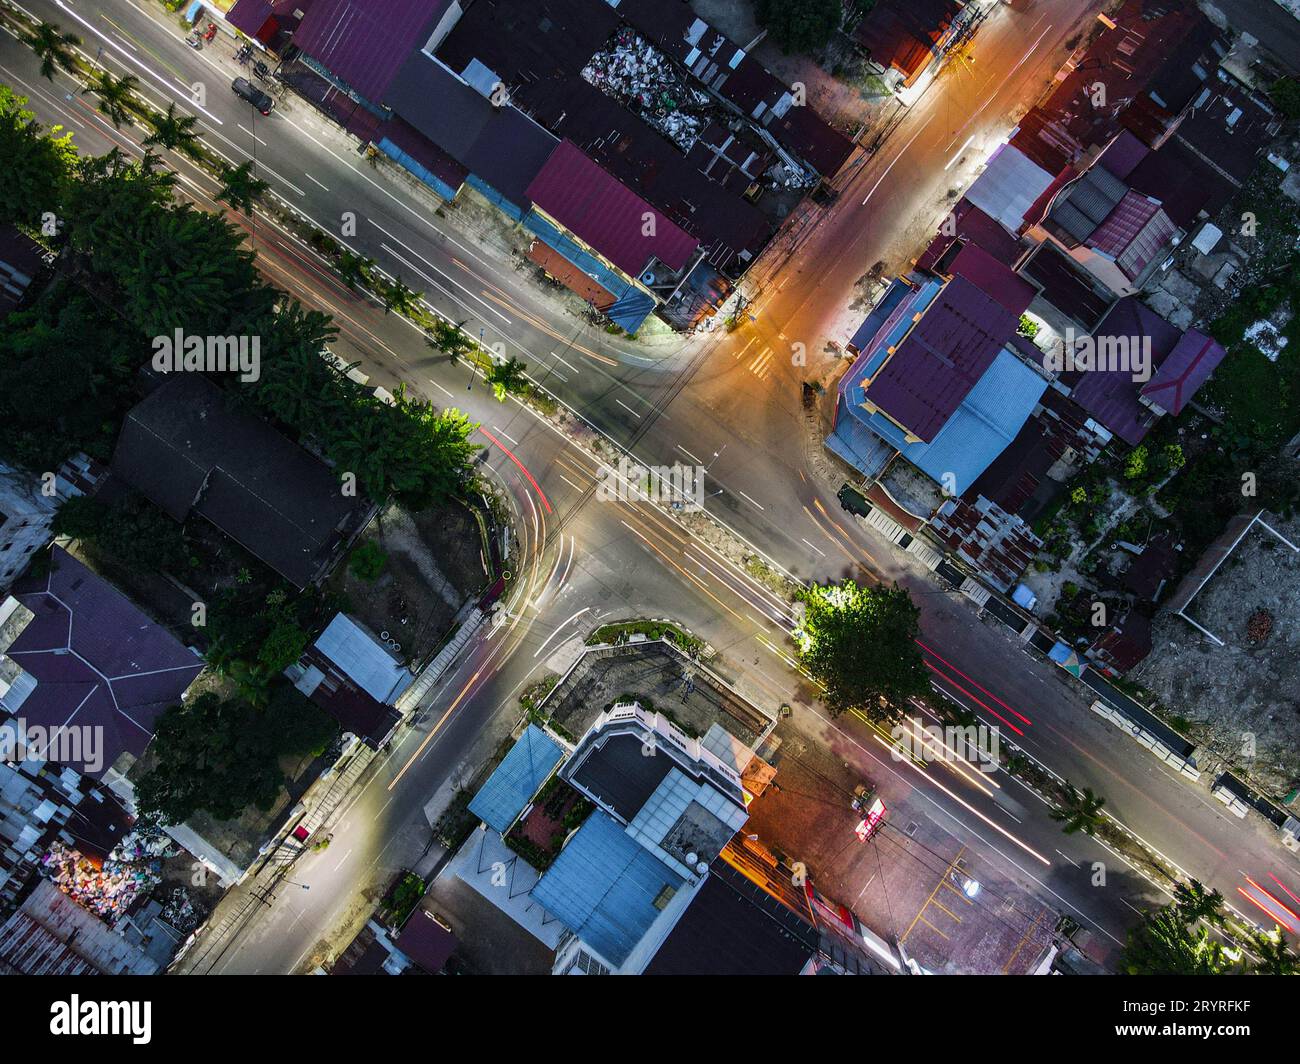 An aerial view of a busy intersection in a city at nighttime. Stock Photo